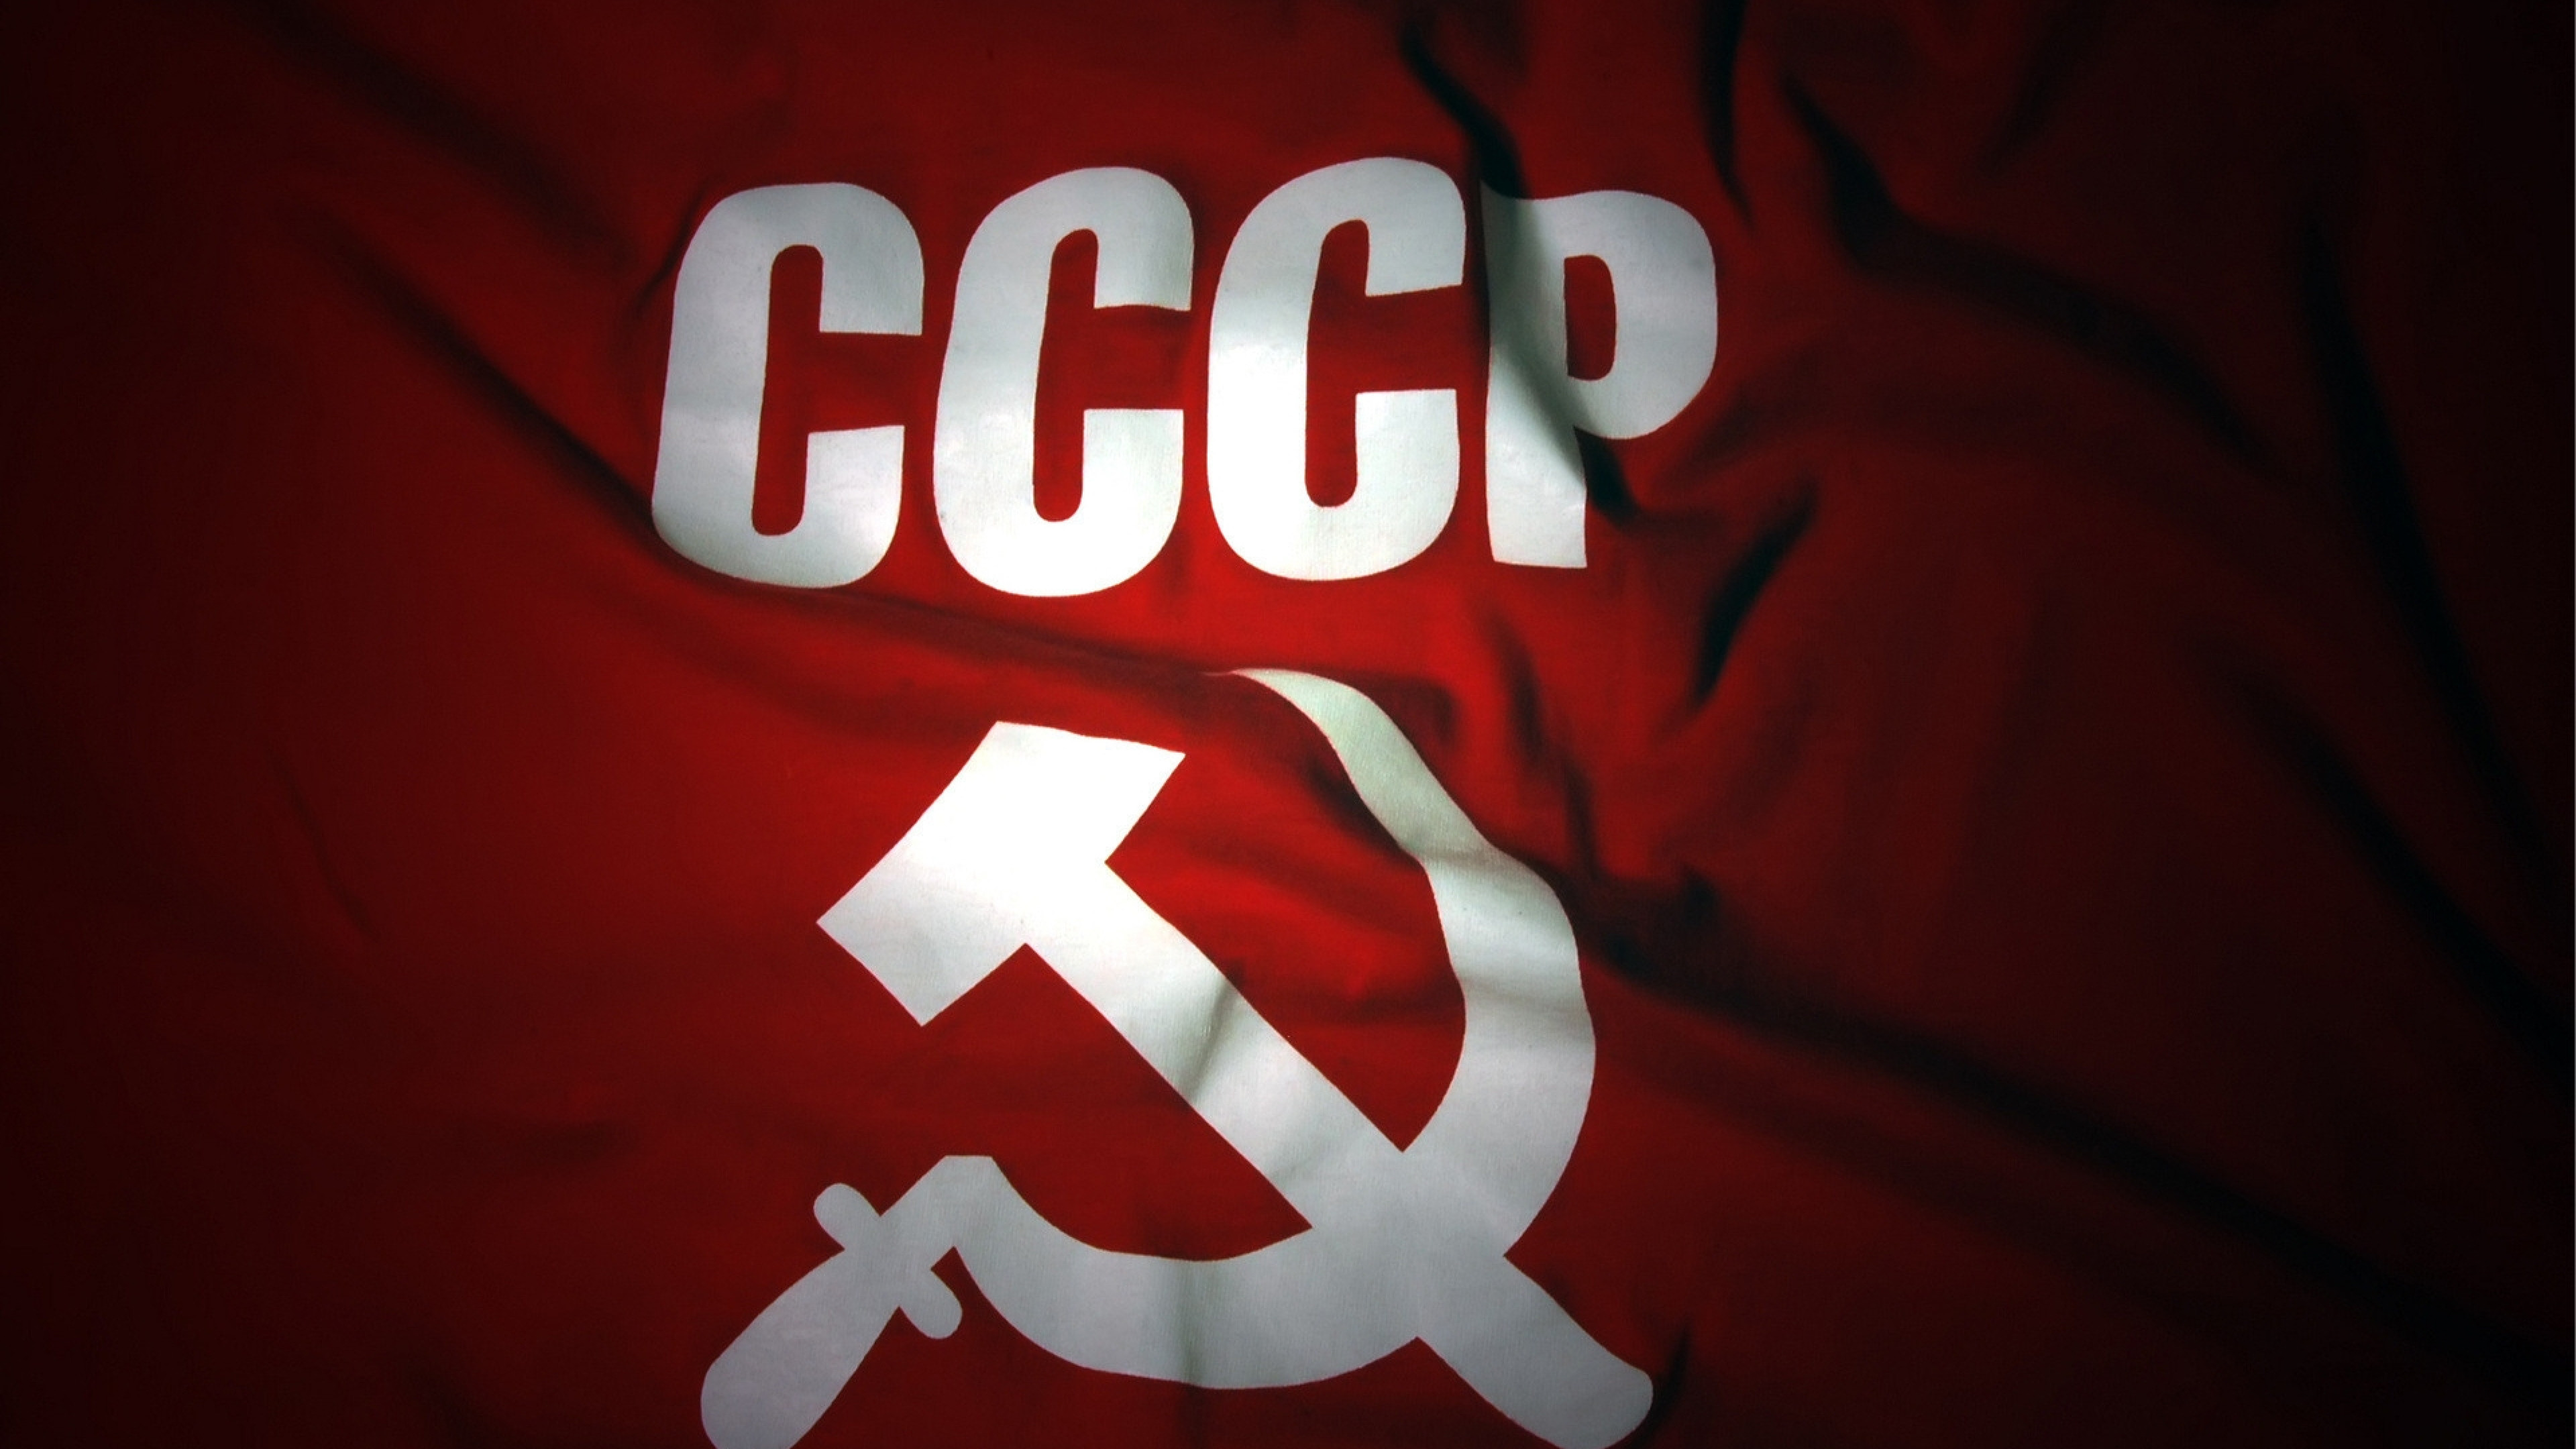 3840x2160 1 Flag Of The Soviet Union HD Wallpapers | Backgrounds - Wallpaper .